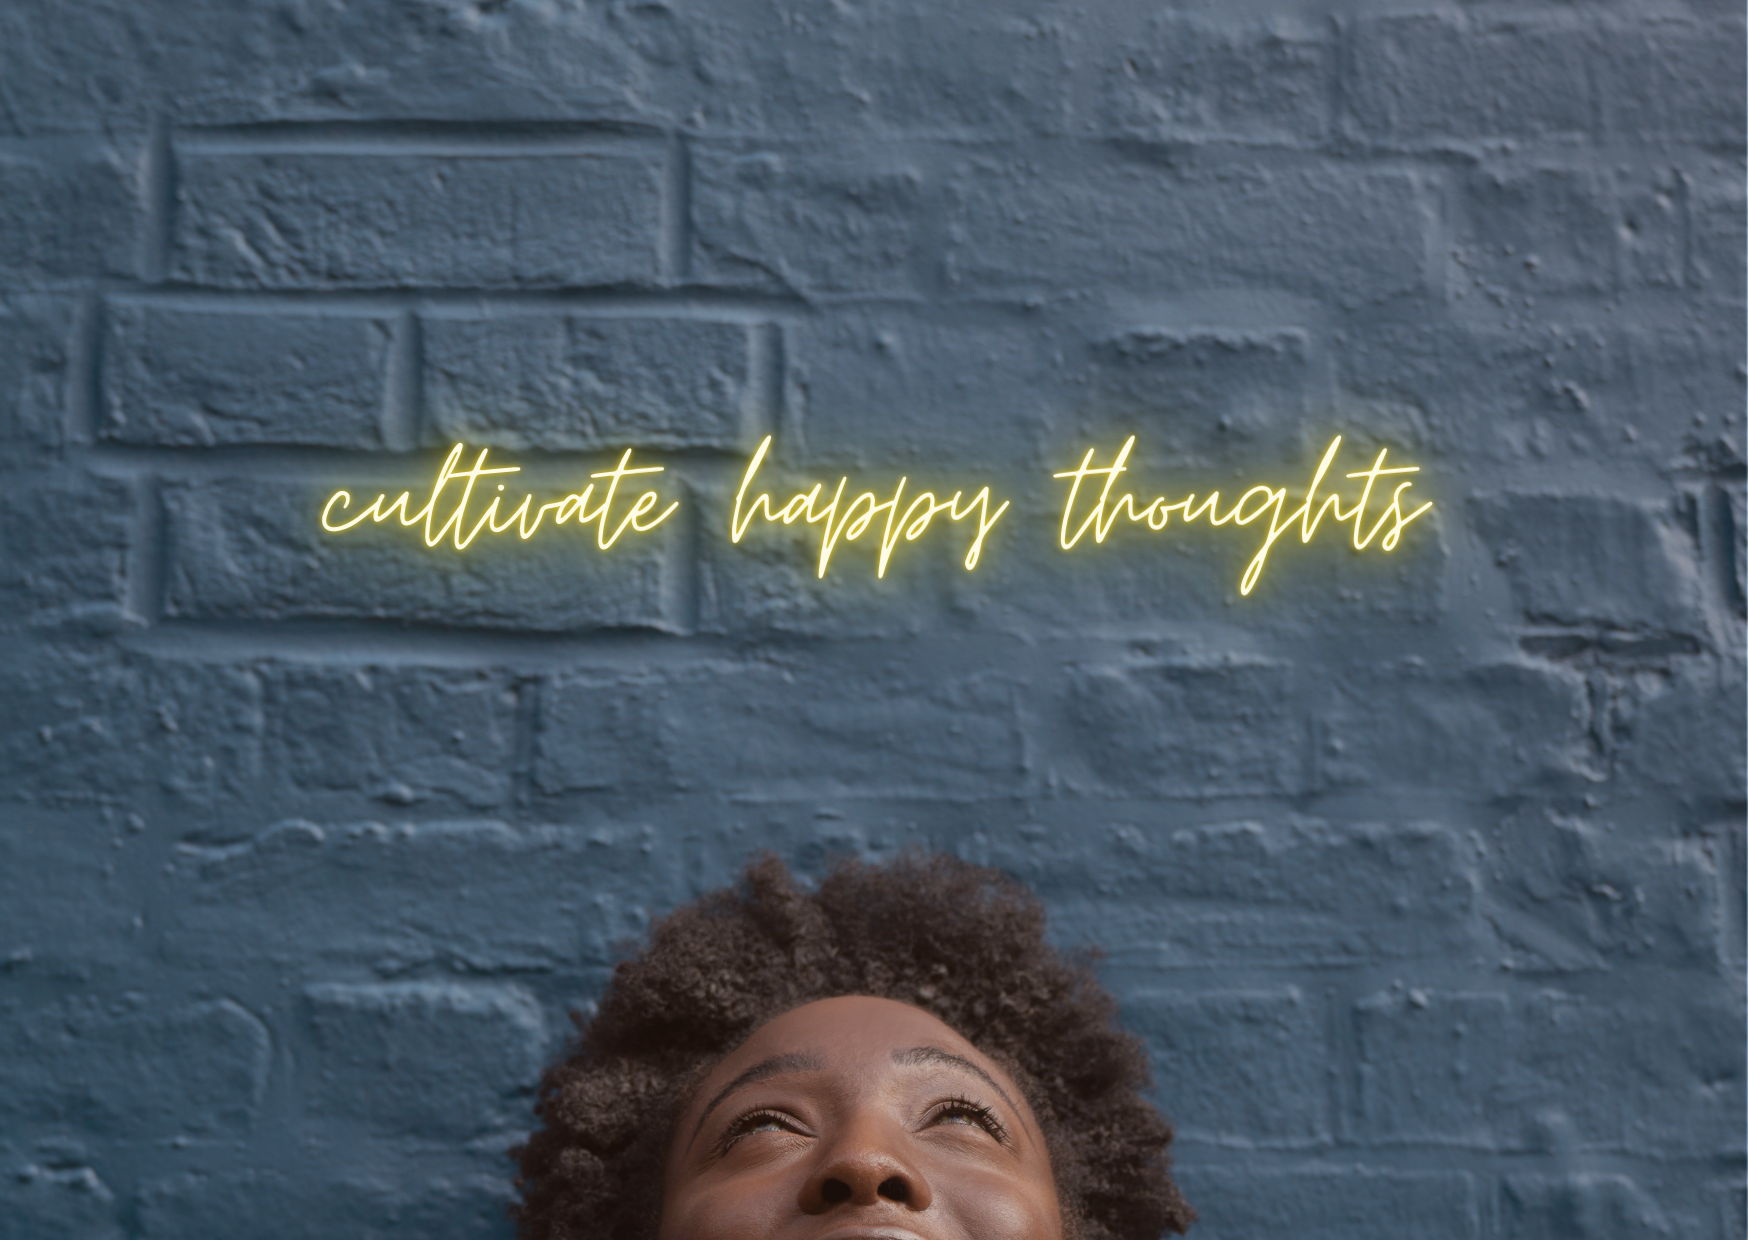 How to cultivate happy thoughts to improve your mood